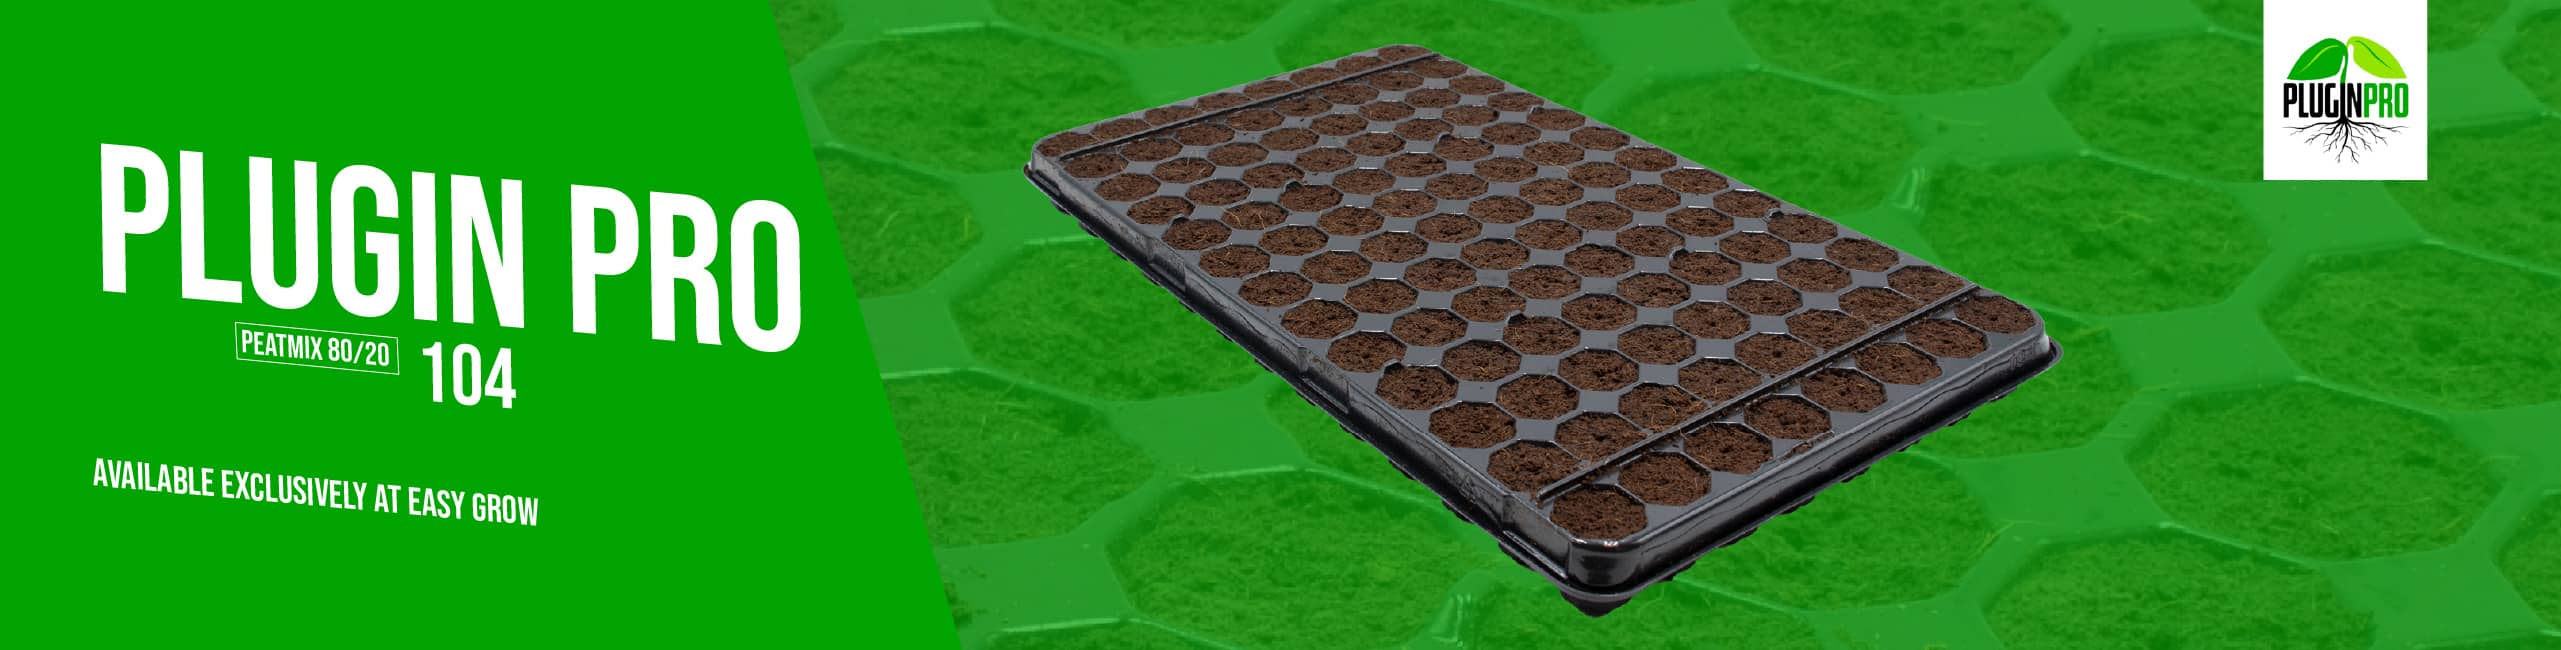 Plug Life Horticultural Propagation Trays Coco Peat